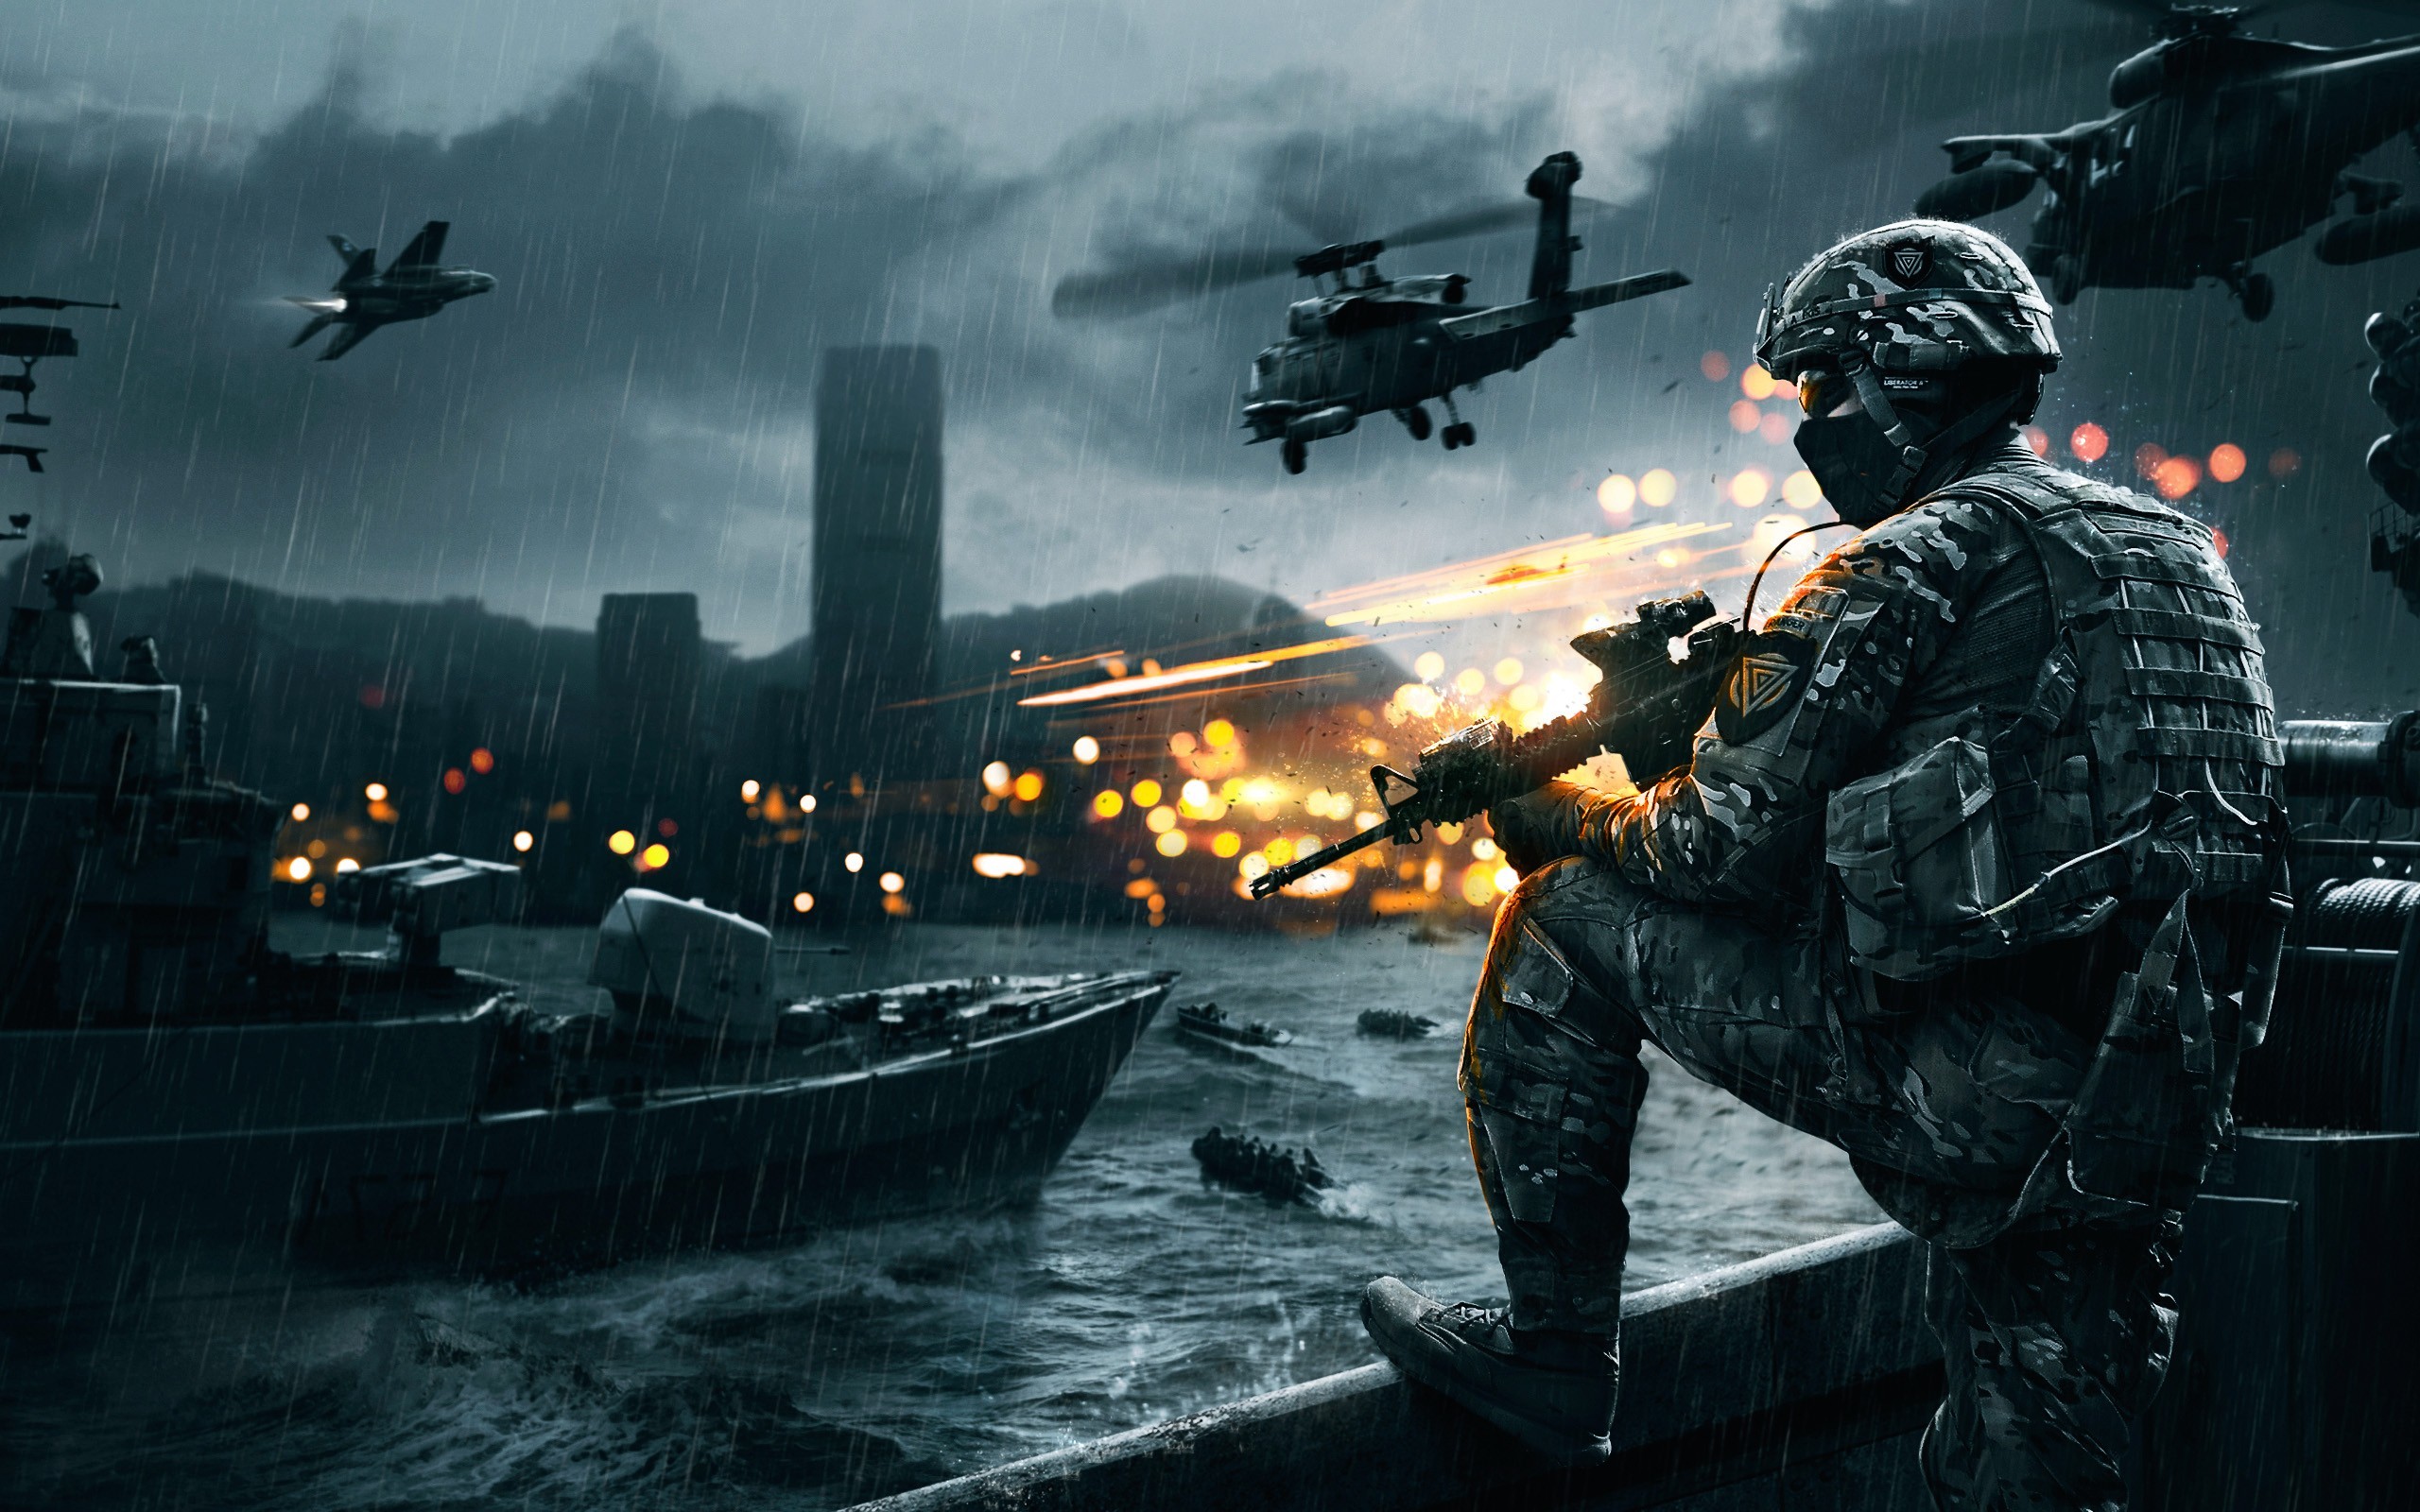 battlefield wallpaper,action adventure game,pc game,shooter game,aircraft,movie